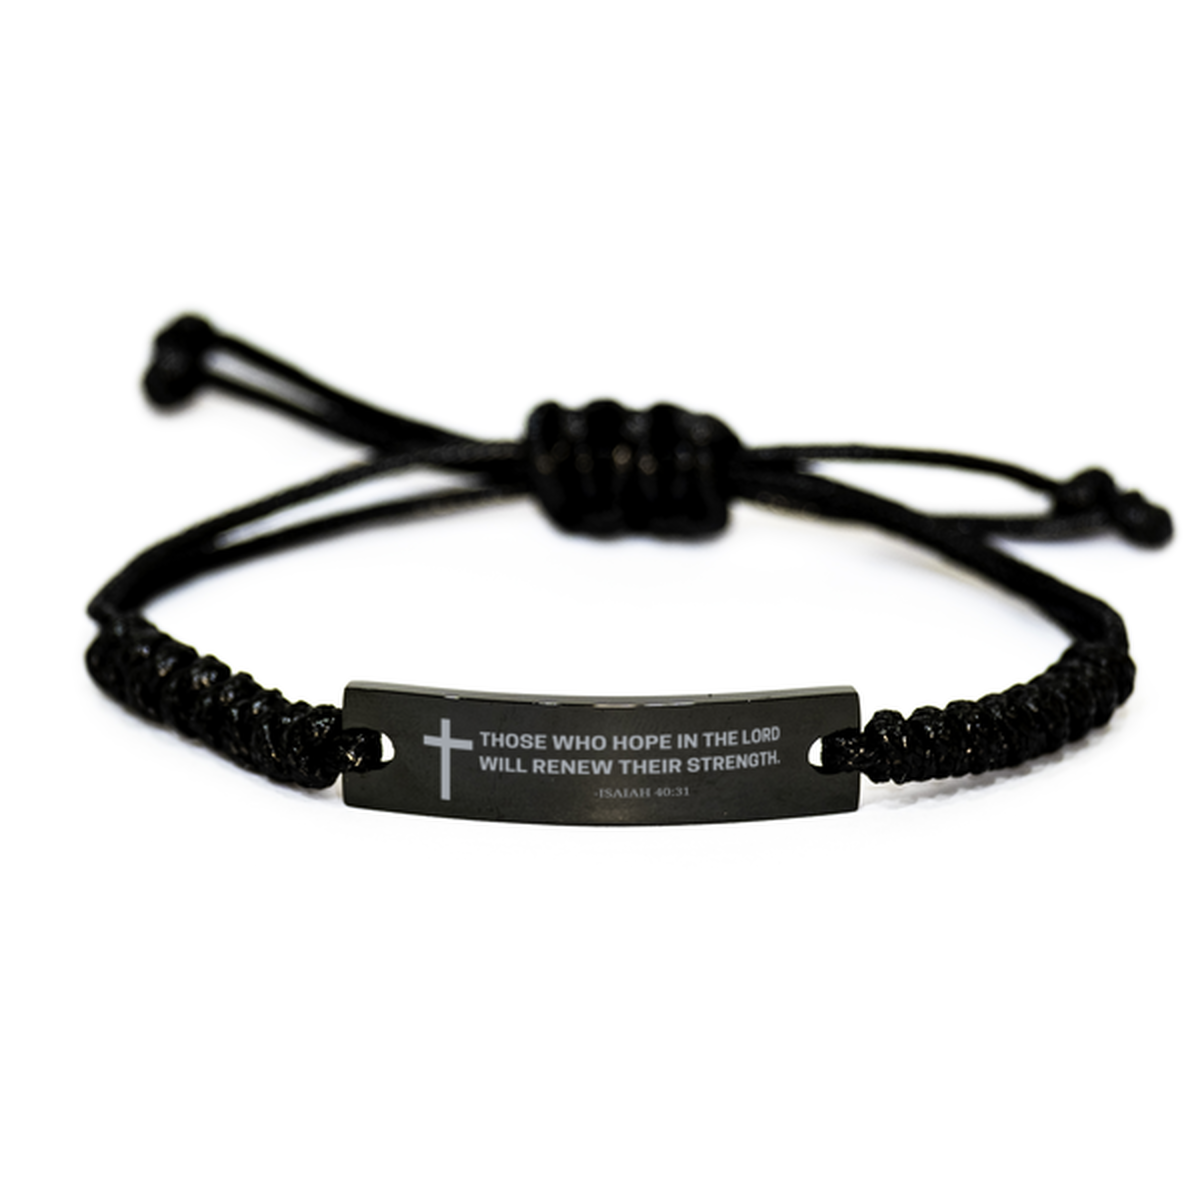 Baptism Gifts For Teenage Boys Girls, Christian Bible Verse Black Rope Bracelet, Those who hope in the Lord, Catholic Confirmation Gifts for Son, Godson, Grandson, Nephew